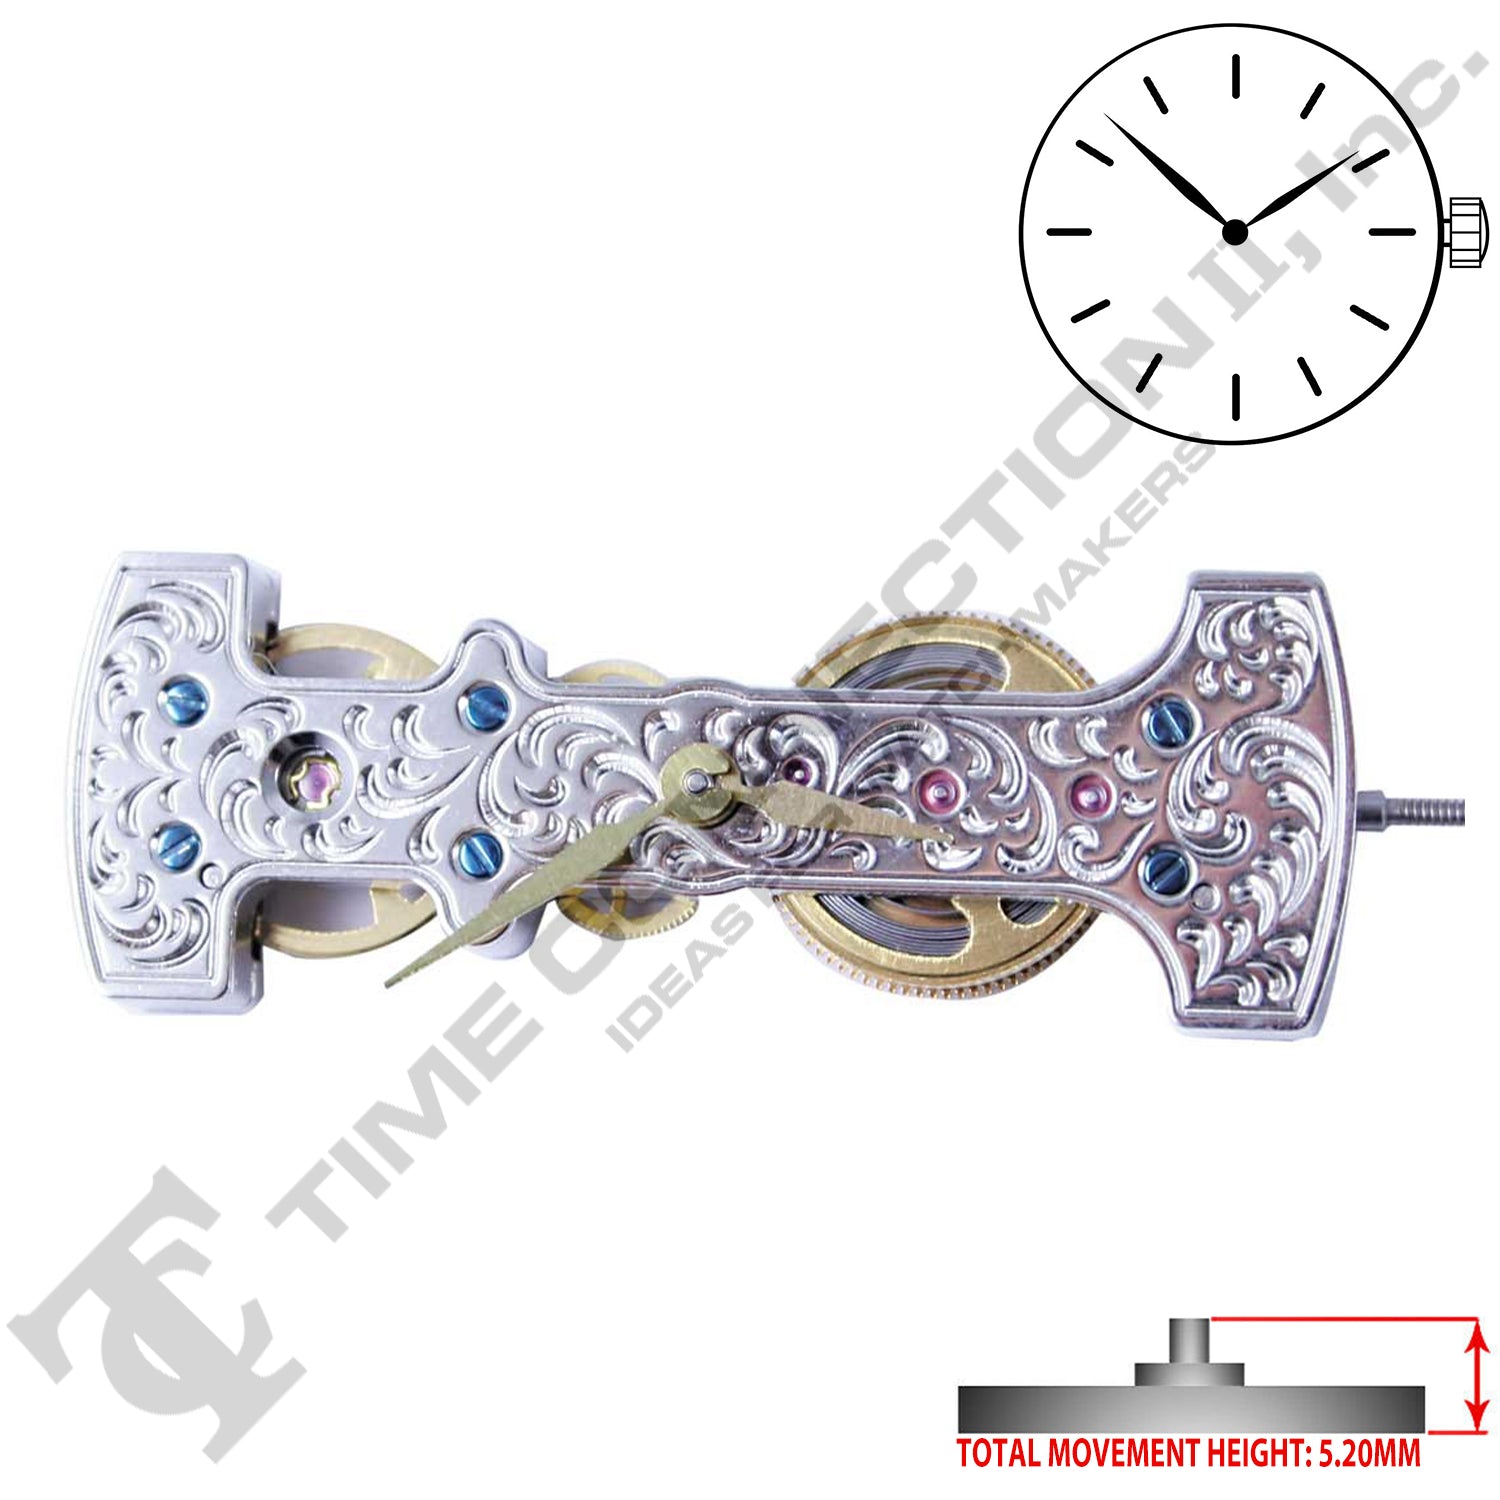 China JQ005 Mechanical Movement Ht. 5.20MM (Steel or Gold Tone)